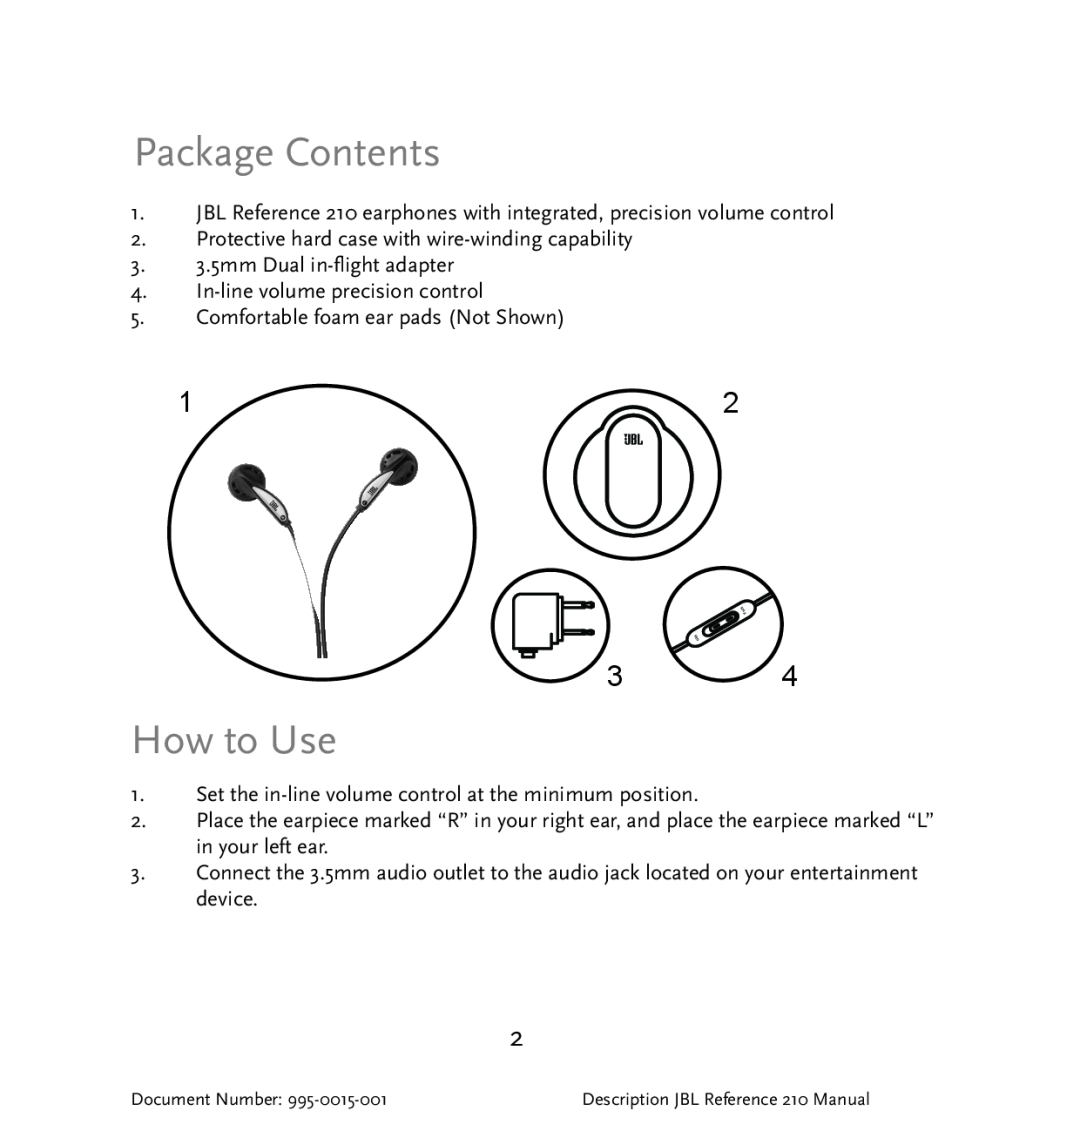 JBL 210 manual Package Contents, How to Use 